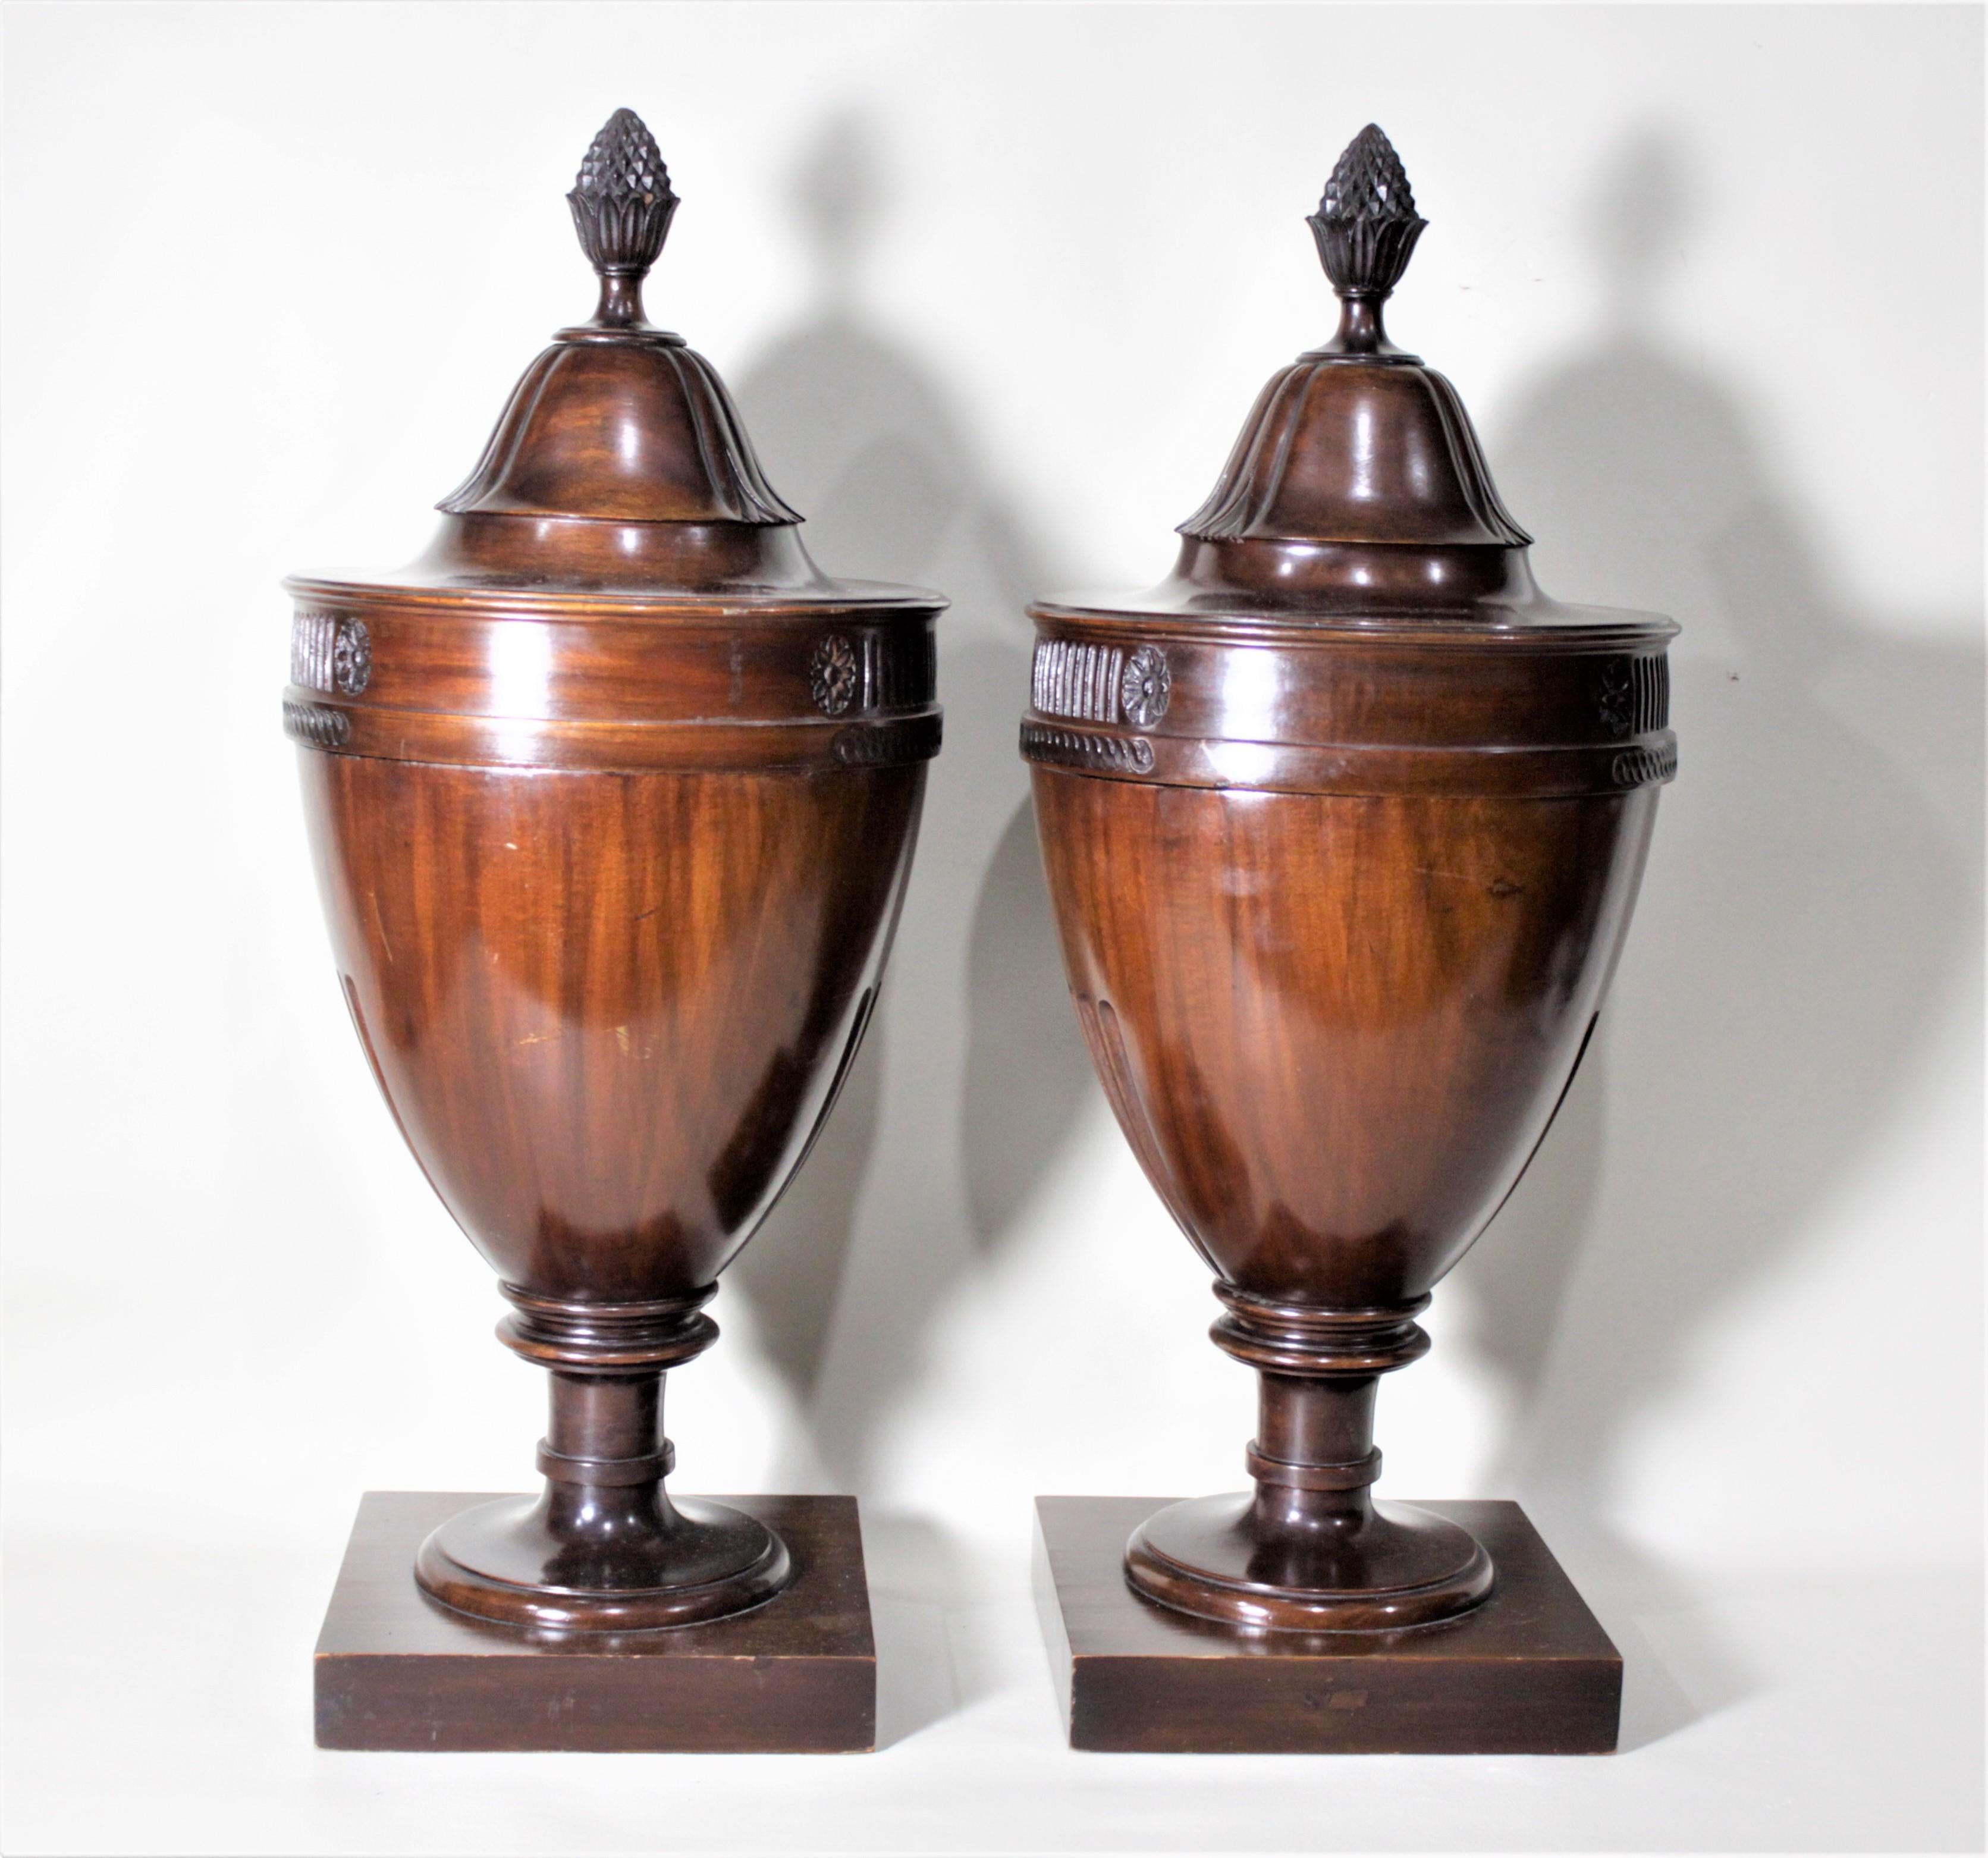 This matched pair of solid mahogany knife urns were made in the Georgian style, presumably originating from England during the Edwardian period. These knife urns show carved accents on the top, base, and finial. Each finial functions as a handle to